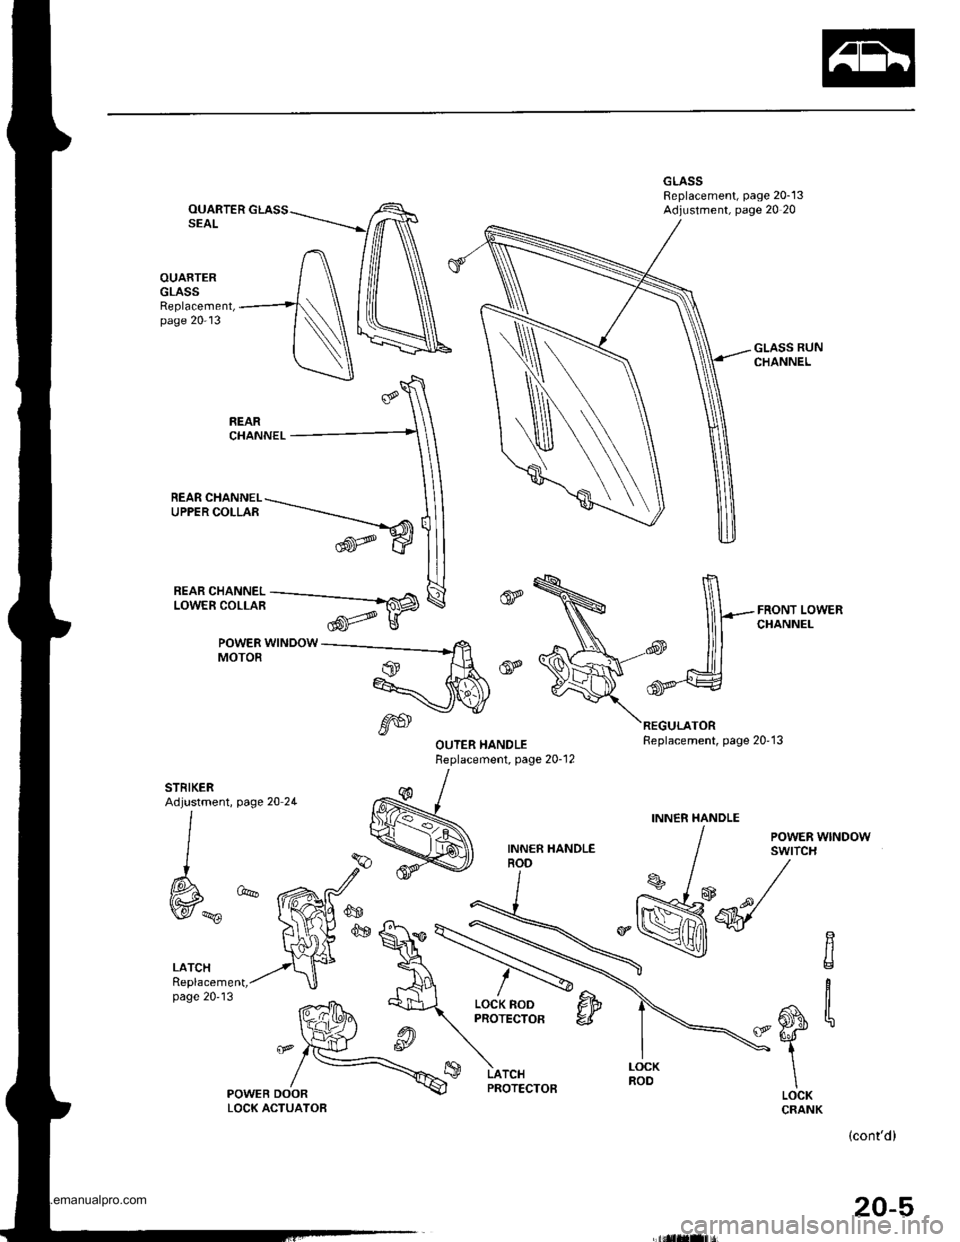 HONDA CR-V 1997 RD1-RD3 / 1.G Workshop Manual 
OUARTERSEAL
OUARTERGLASSReplacement,page 20-13
-flHiili^i--_Fffi
POWER WINDOWMOTOR
REAR CHANNEL-\UPPERCOLLAR -.-----_----_-""
trw
page 20 2L
LATCHReplacement,page 2013
POWEB DOORLOCK ACTUATOB
,6S
R